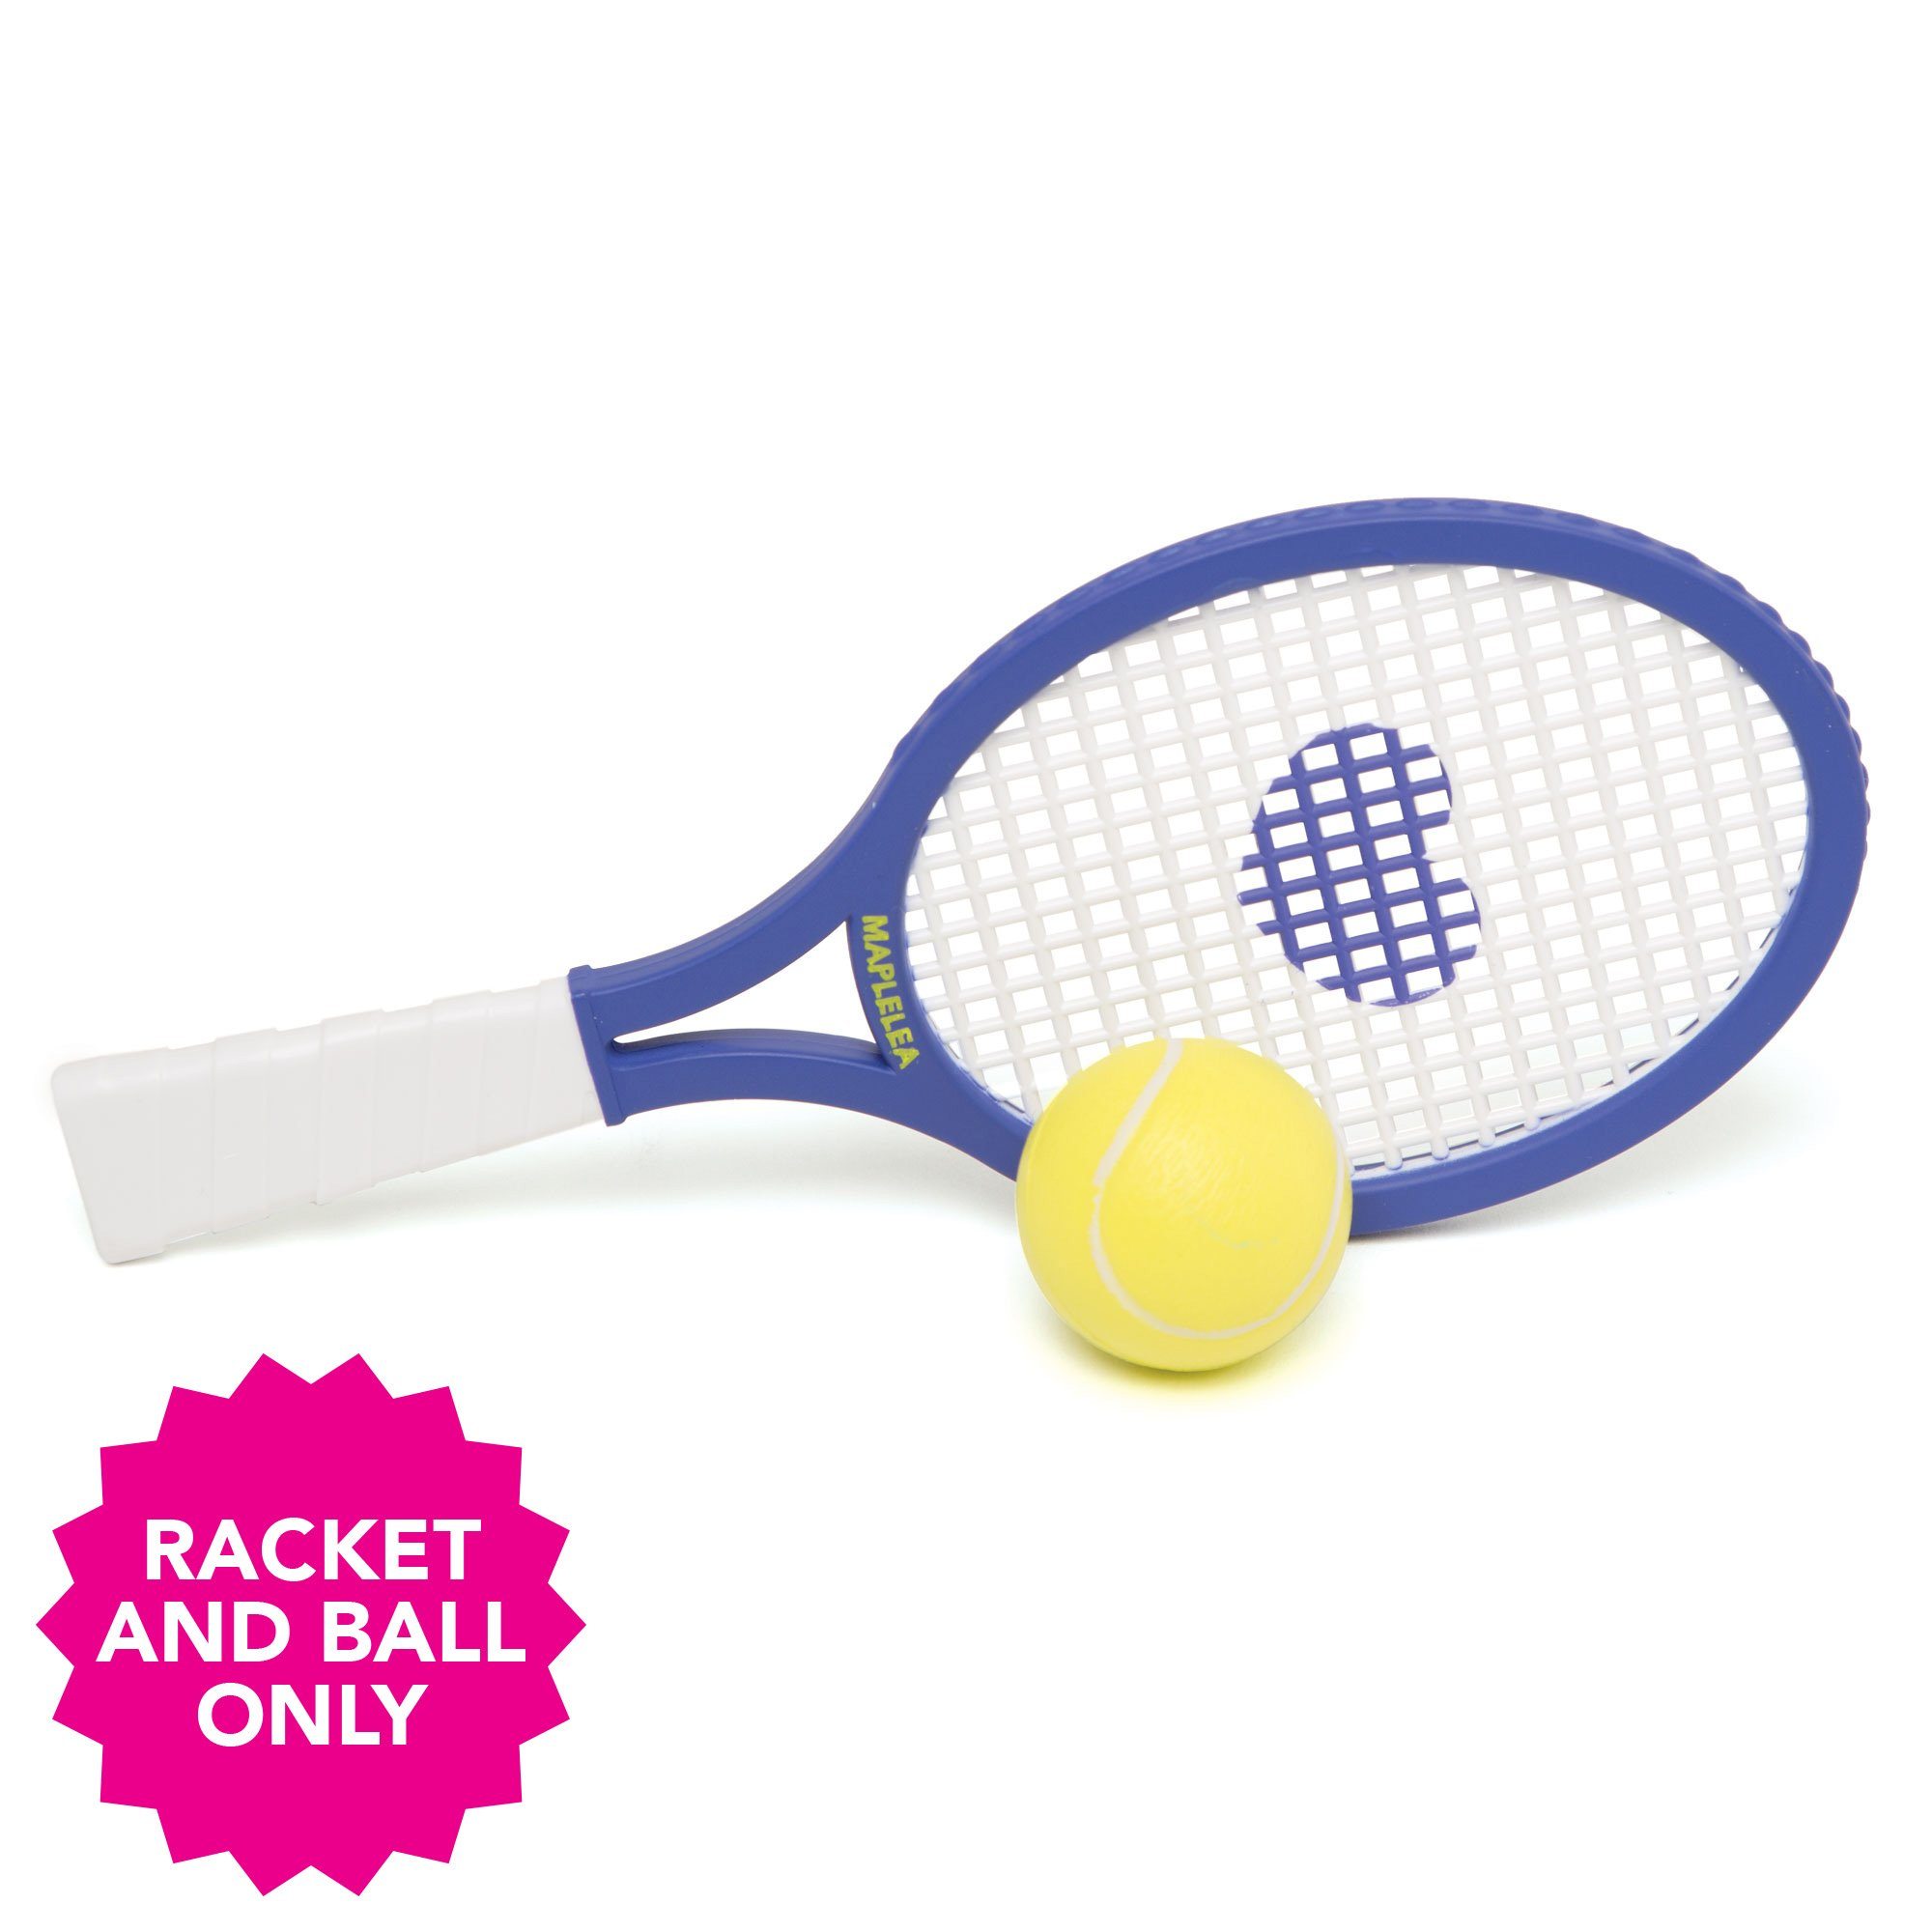 XKM93AD - Tennis Racquet and Ball Only